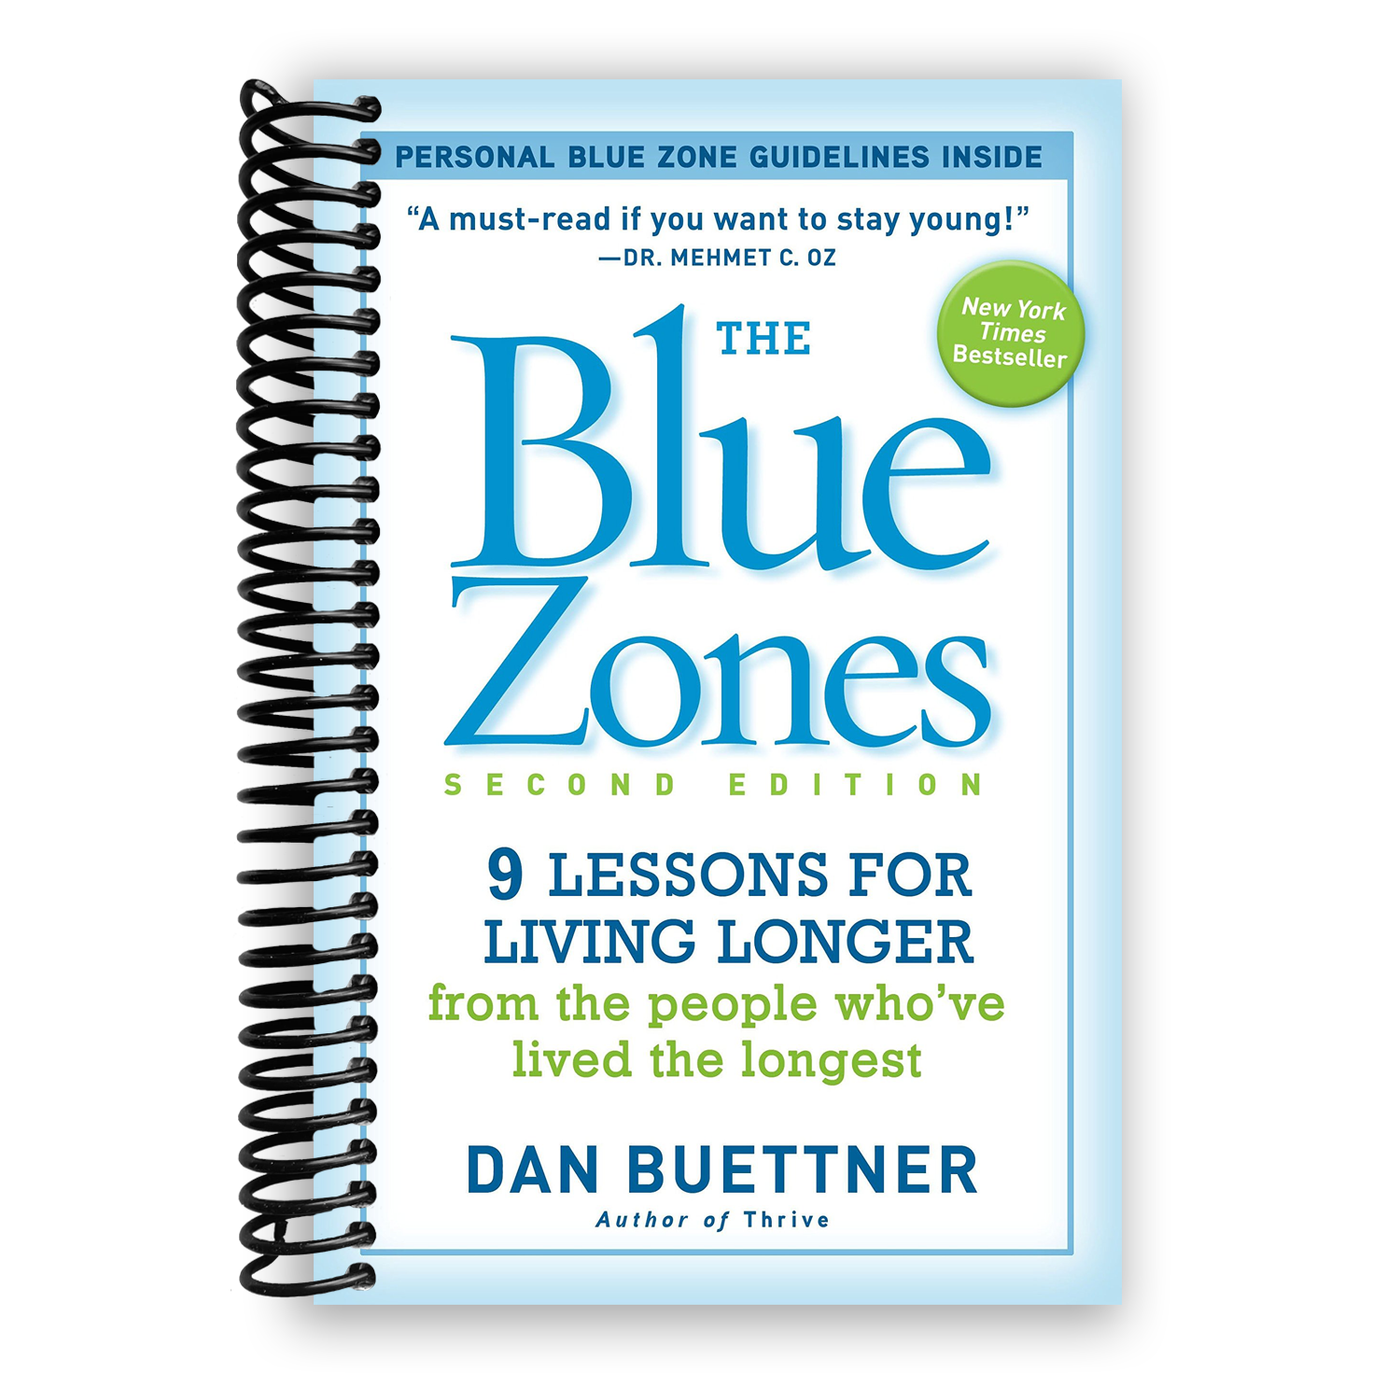 The Blue Zones, Second Edition: 9 Lessons for Living Longer From the People Who've Lived the Longest (Spiral Bound)